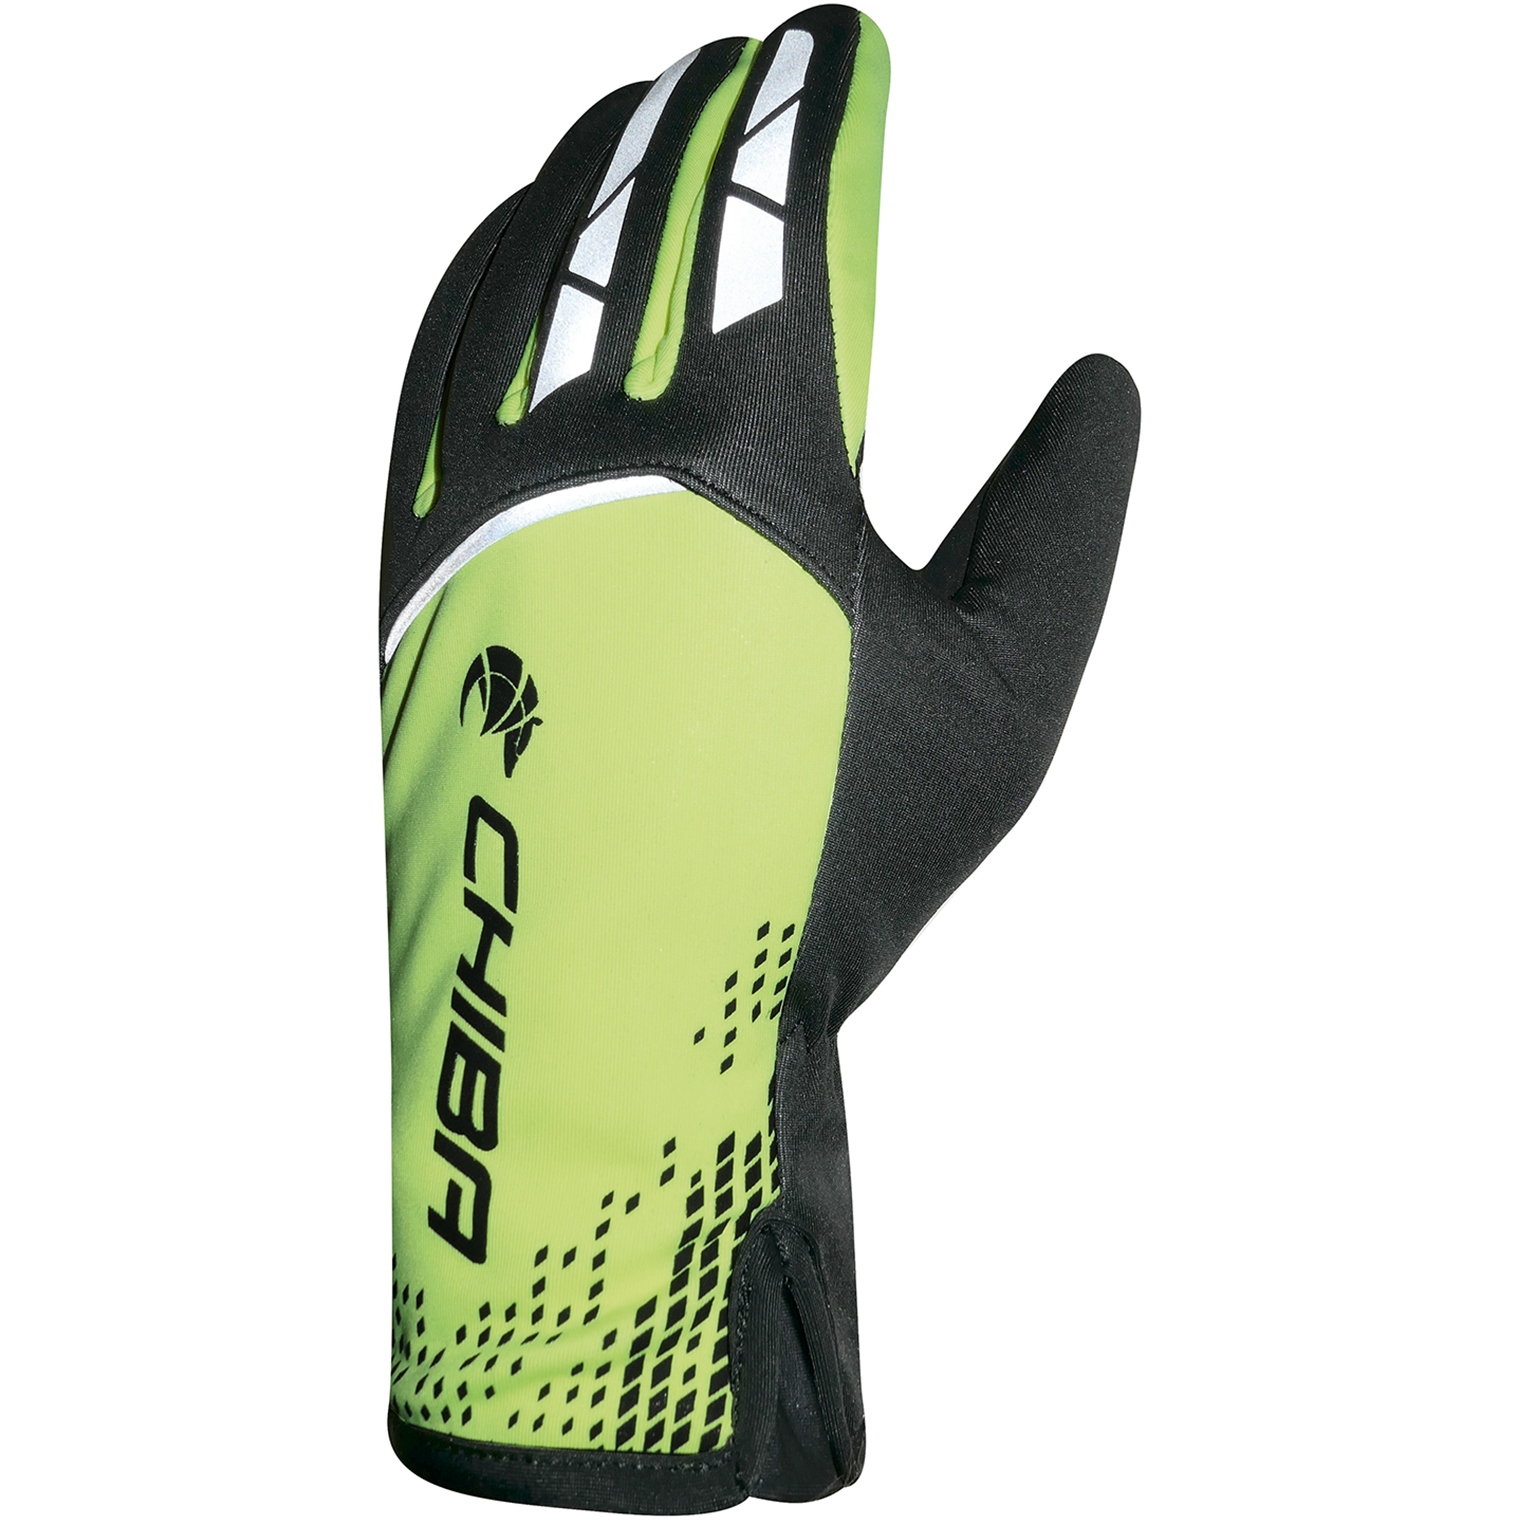 Picture of Chiba 2nd Skin Light Cycling Gloves - neon yellow